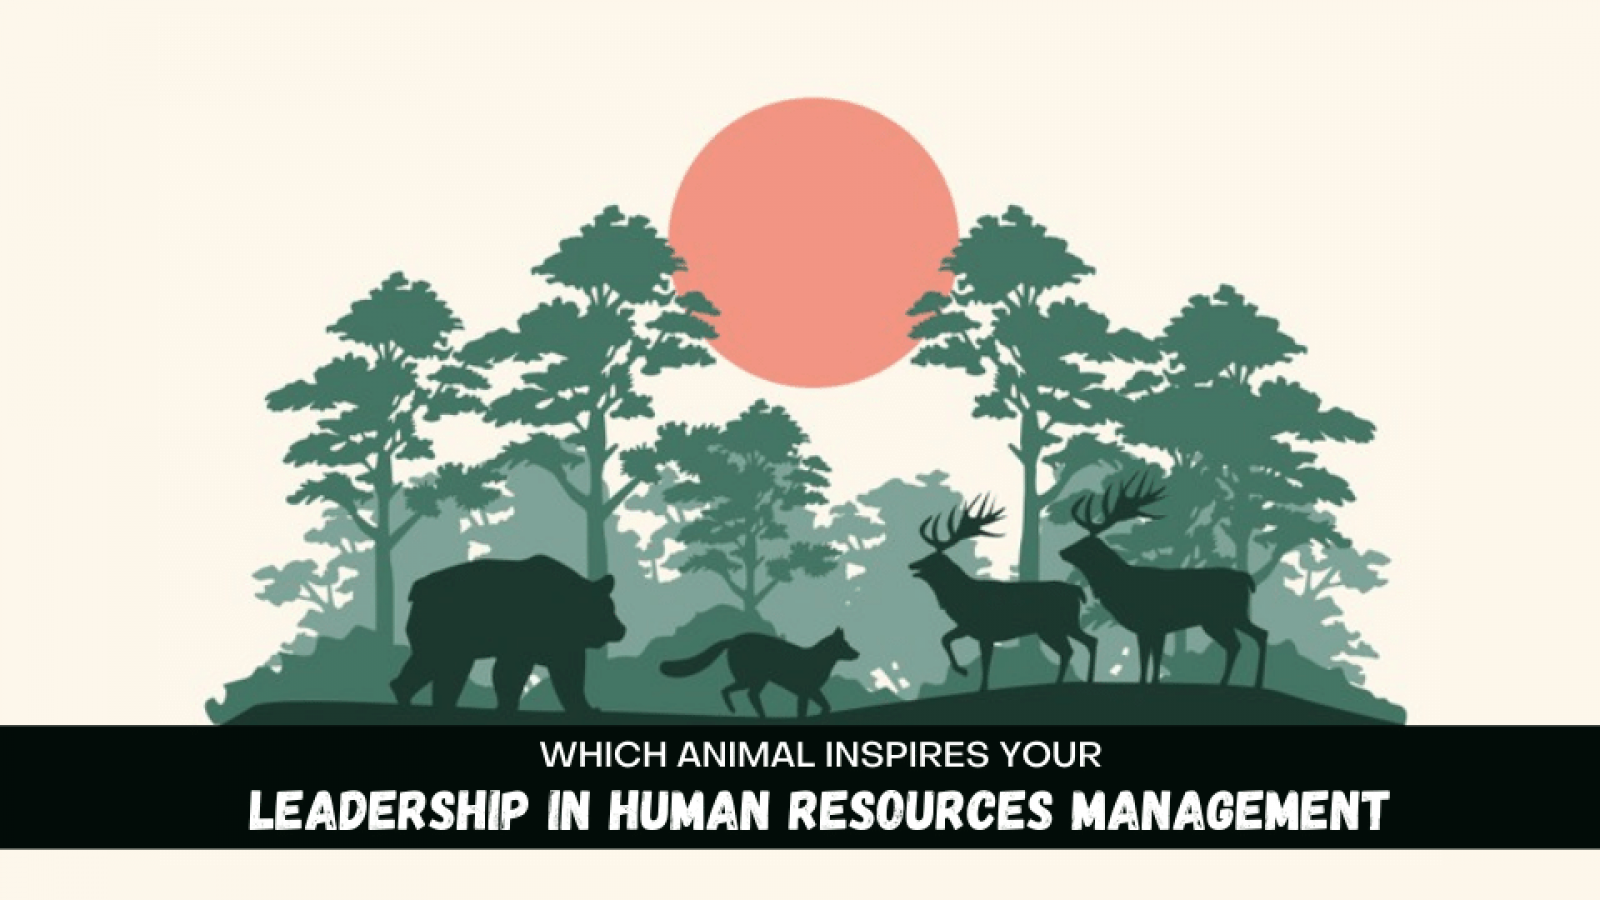 8 Spirit Animals for Leadership in Human Resources Management